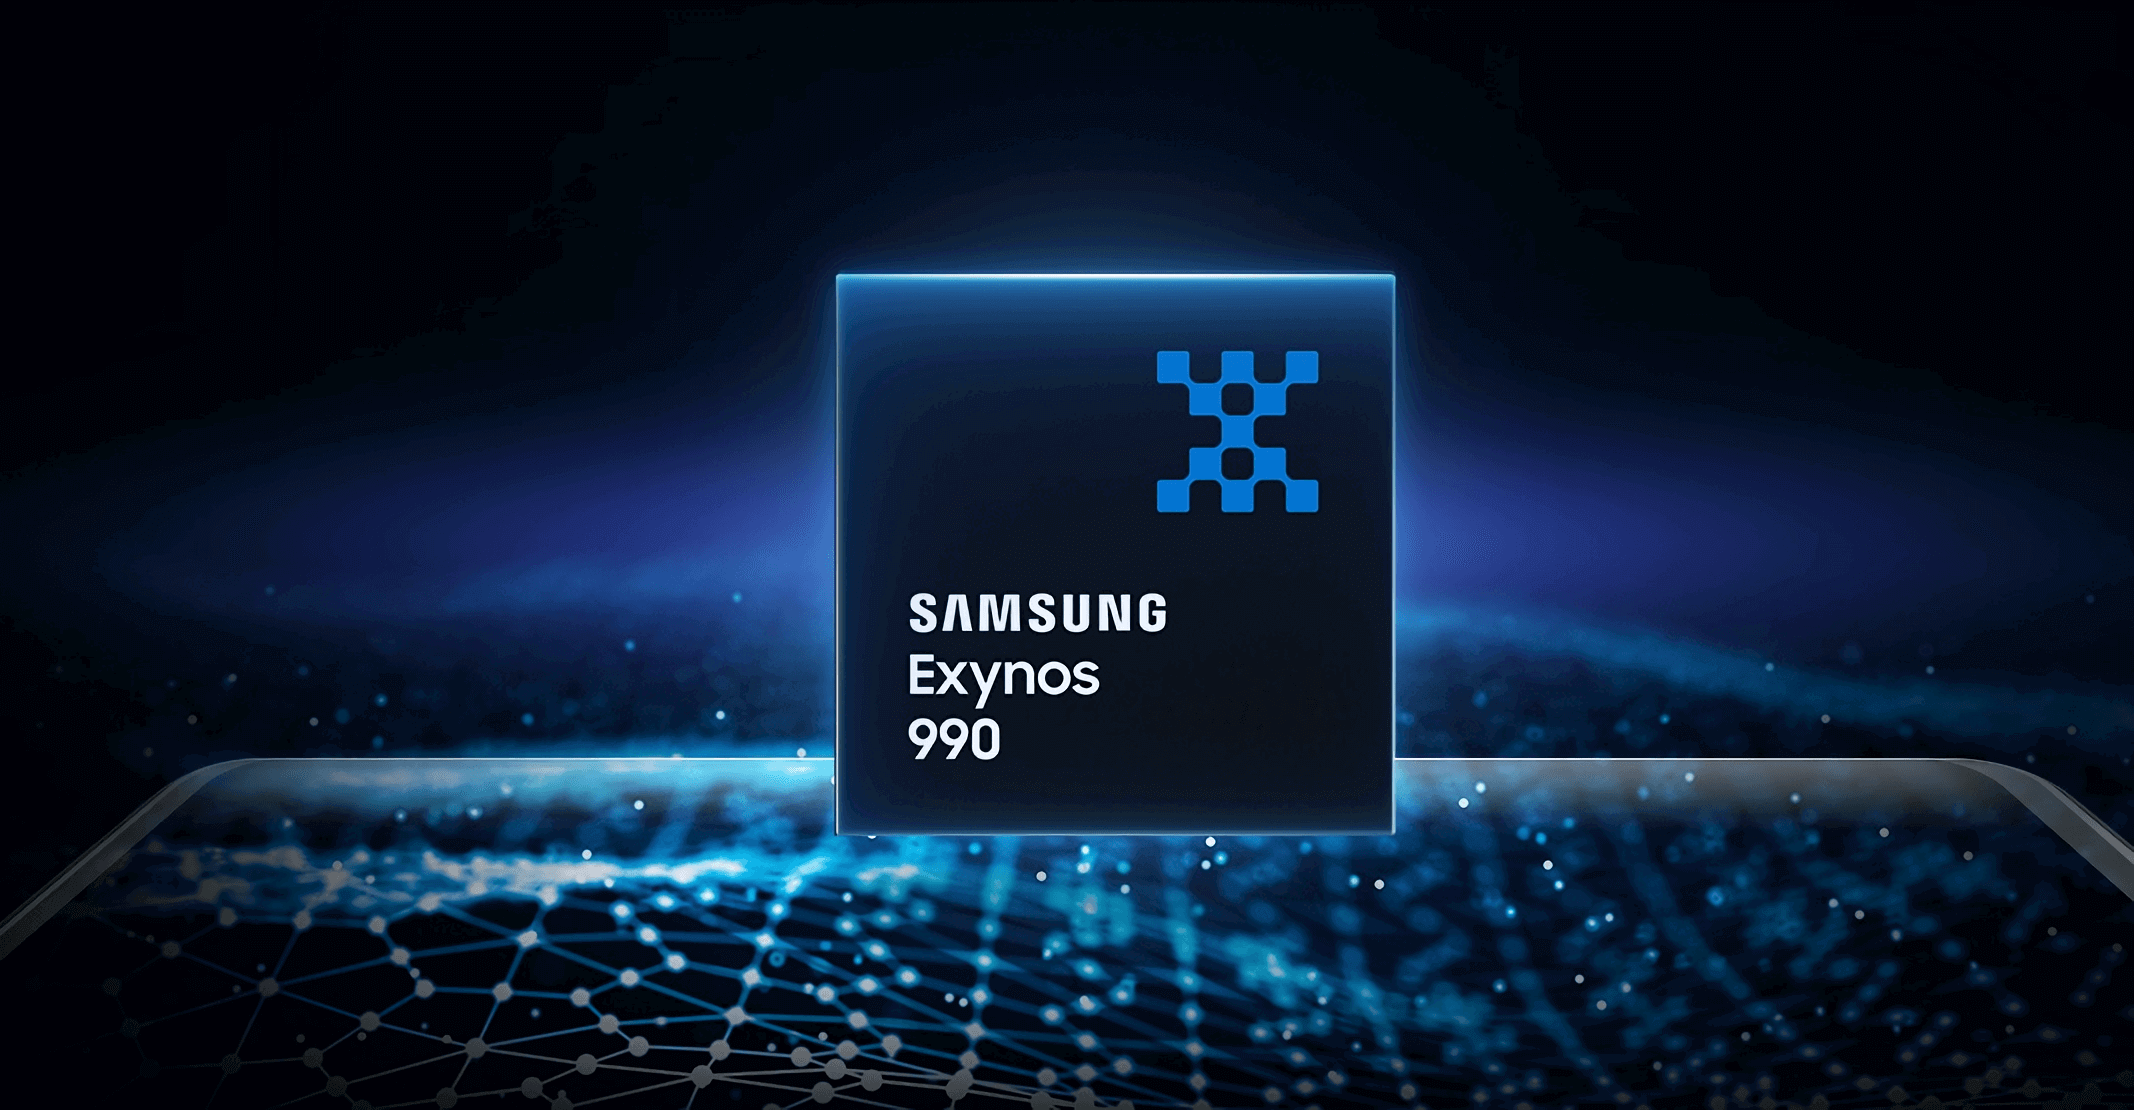 New Exynos 990 SoC is up to 20% faster than current-gen competition, says Samsung